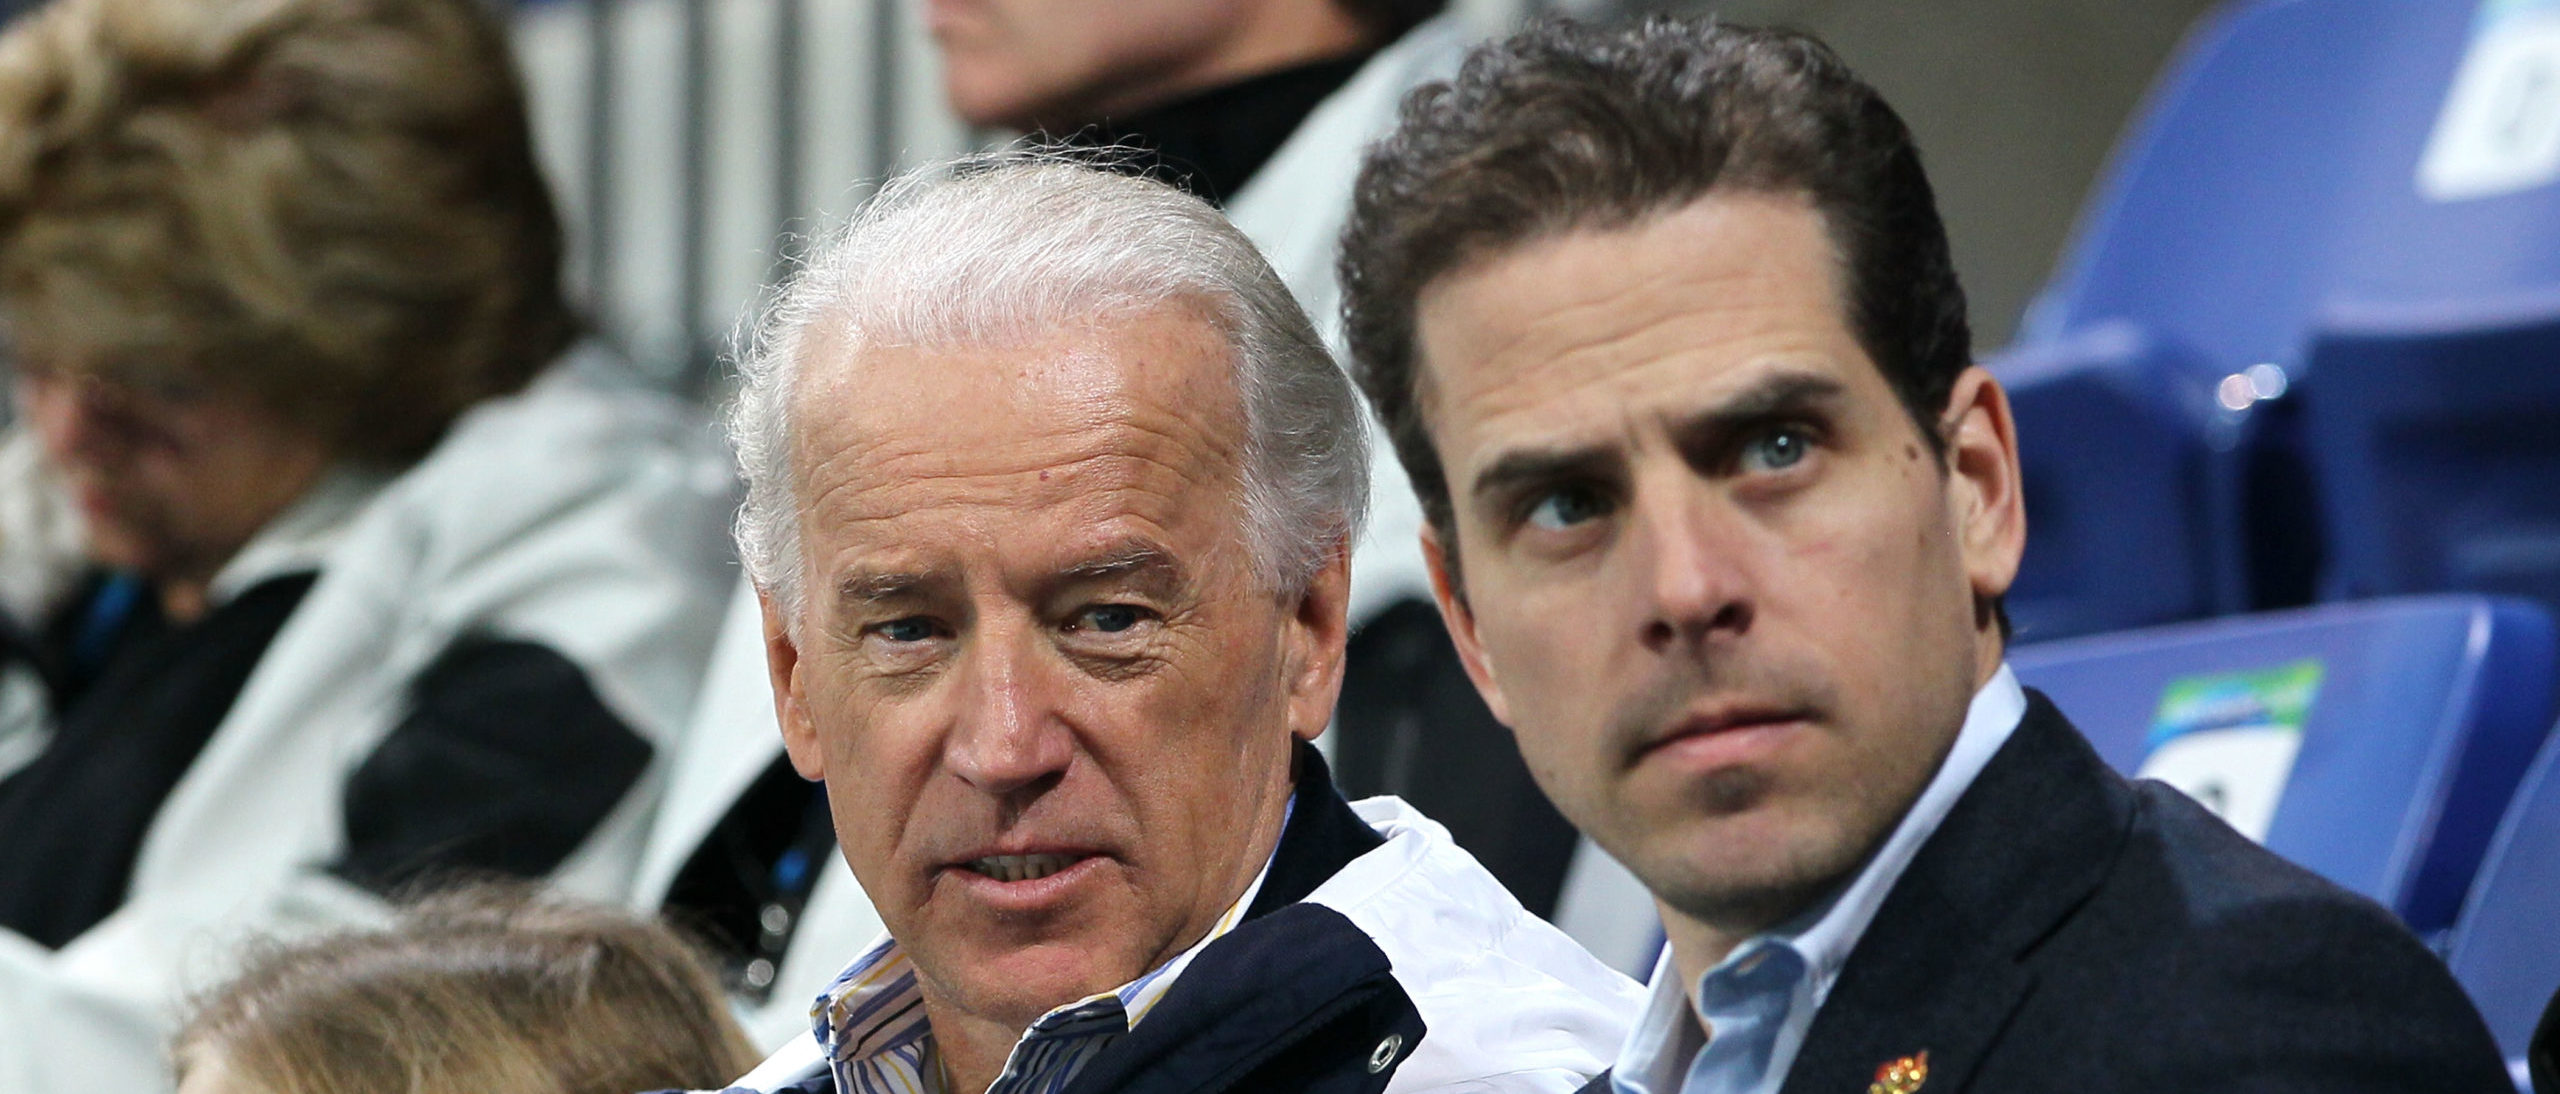 Joe Biden Used Fake Name To Exchange Over 50 Private Emails With Hunter Biden’s Business Associate, Docs Show